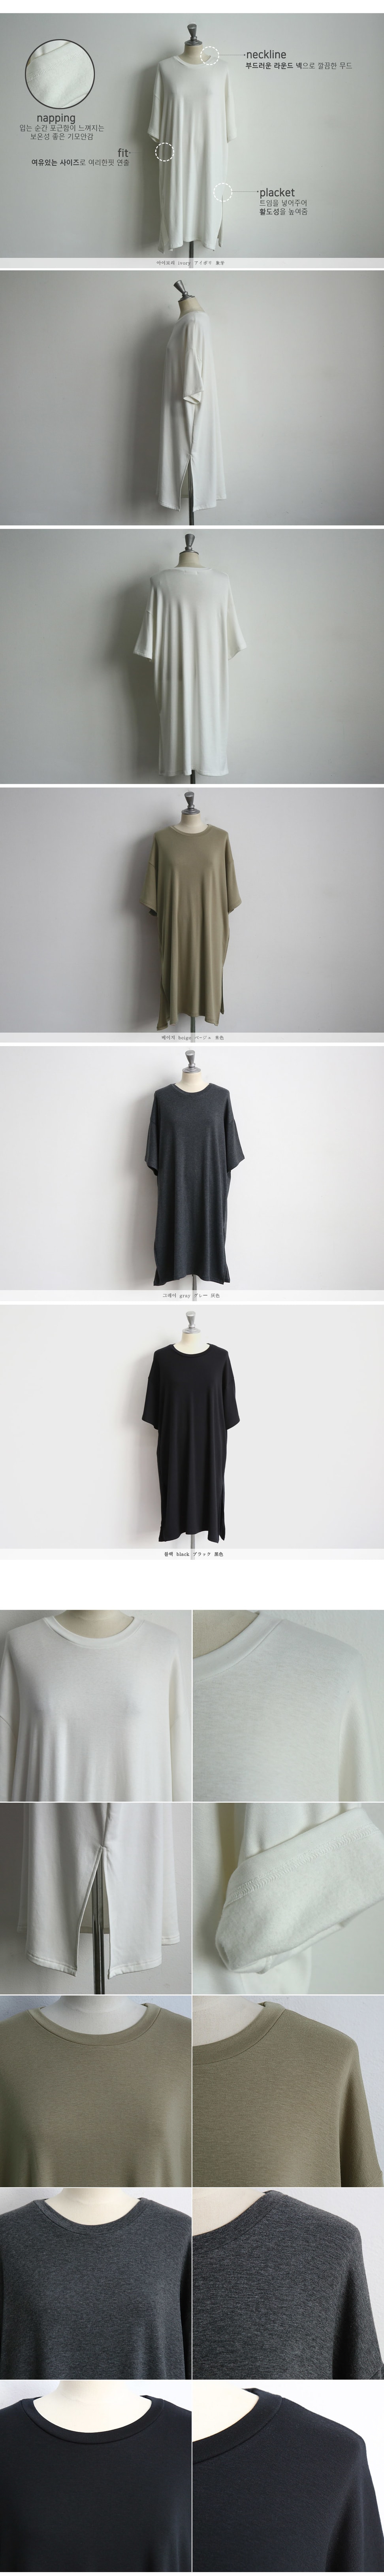 Round neck solid color loose seven-point sleeve dress black one size